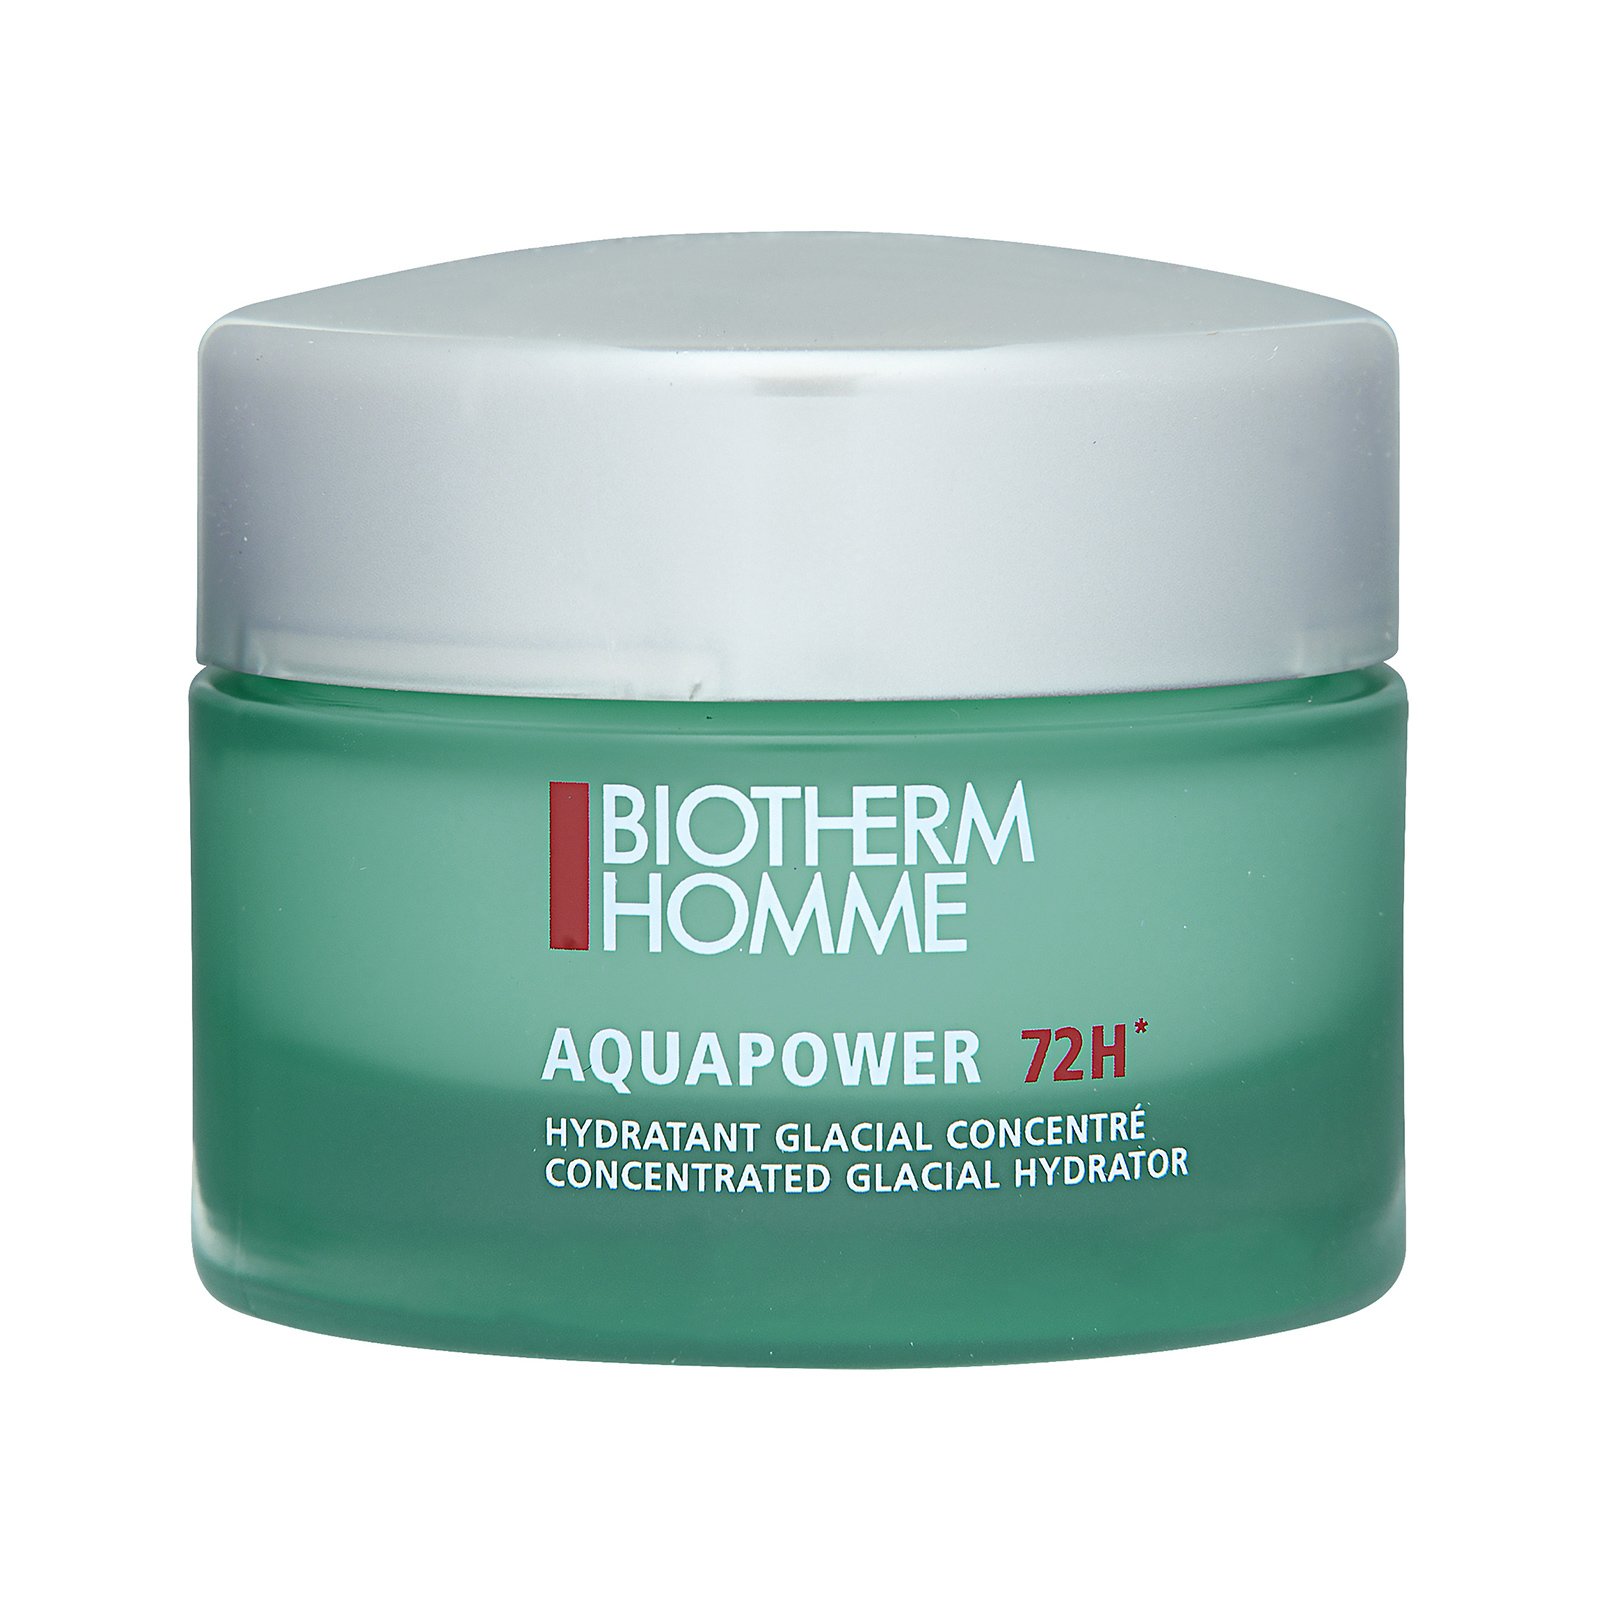 Homme AquaPower 72 H Concentrated Glacial Hydrator